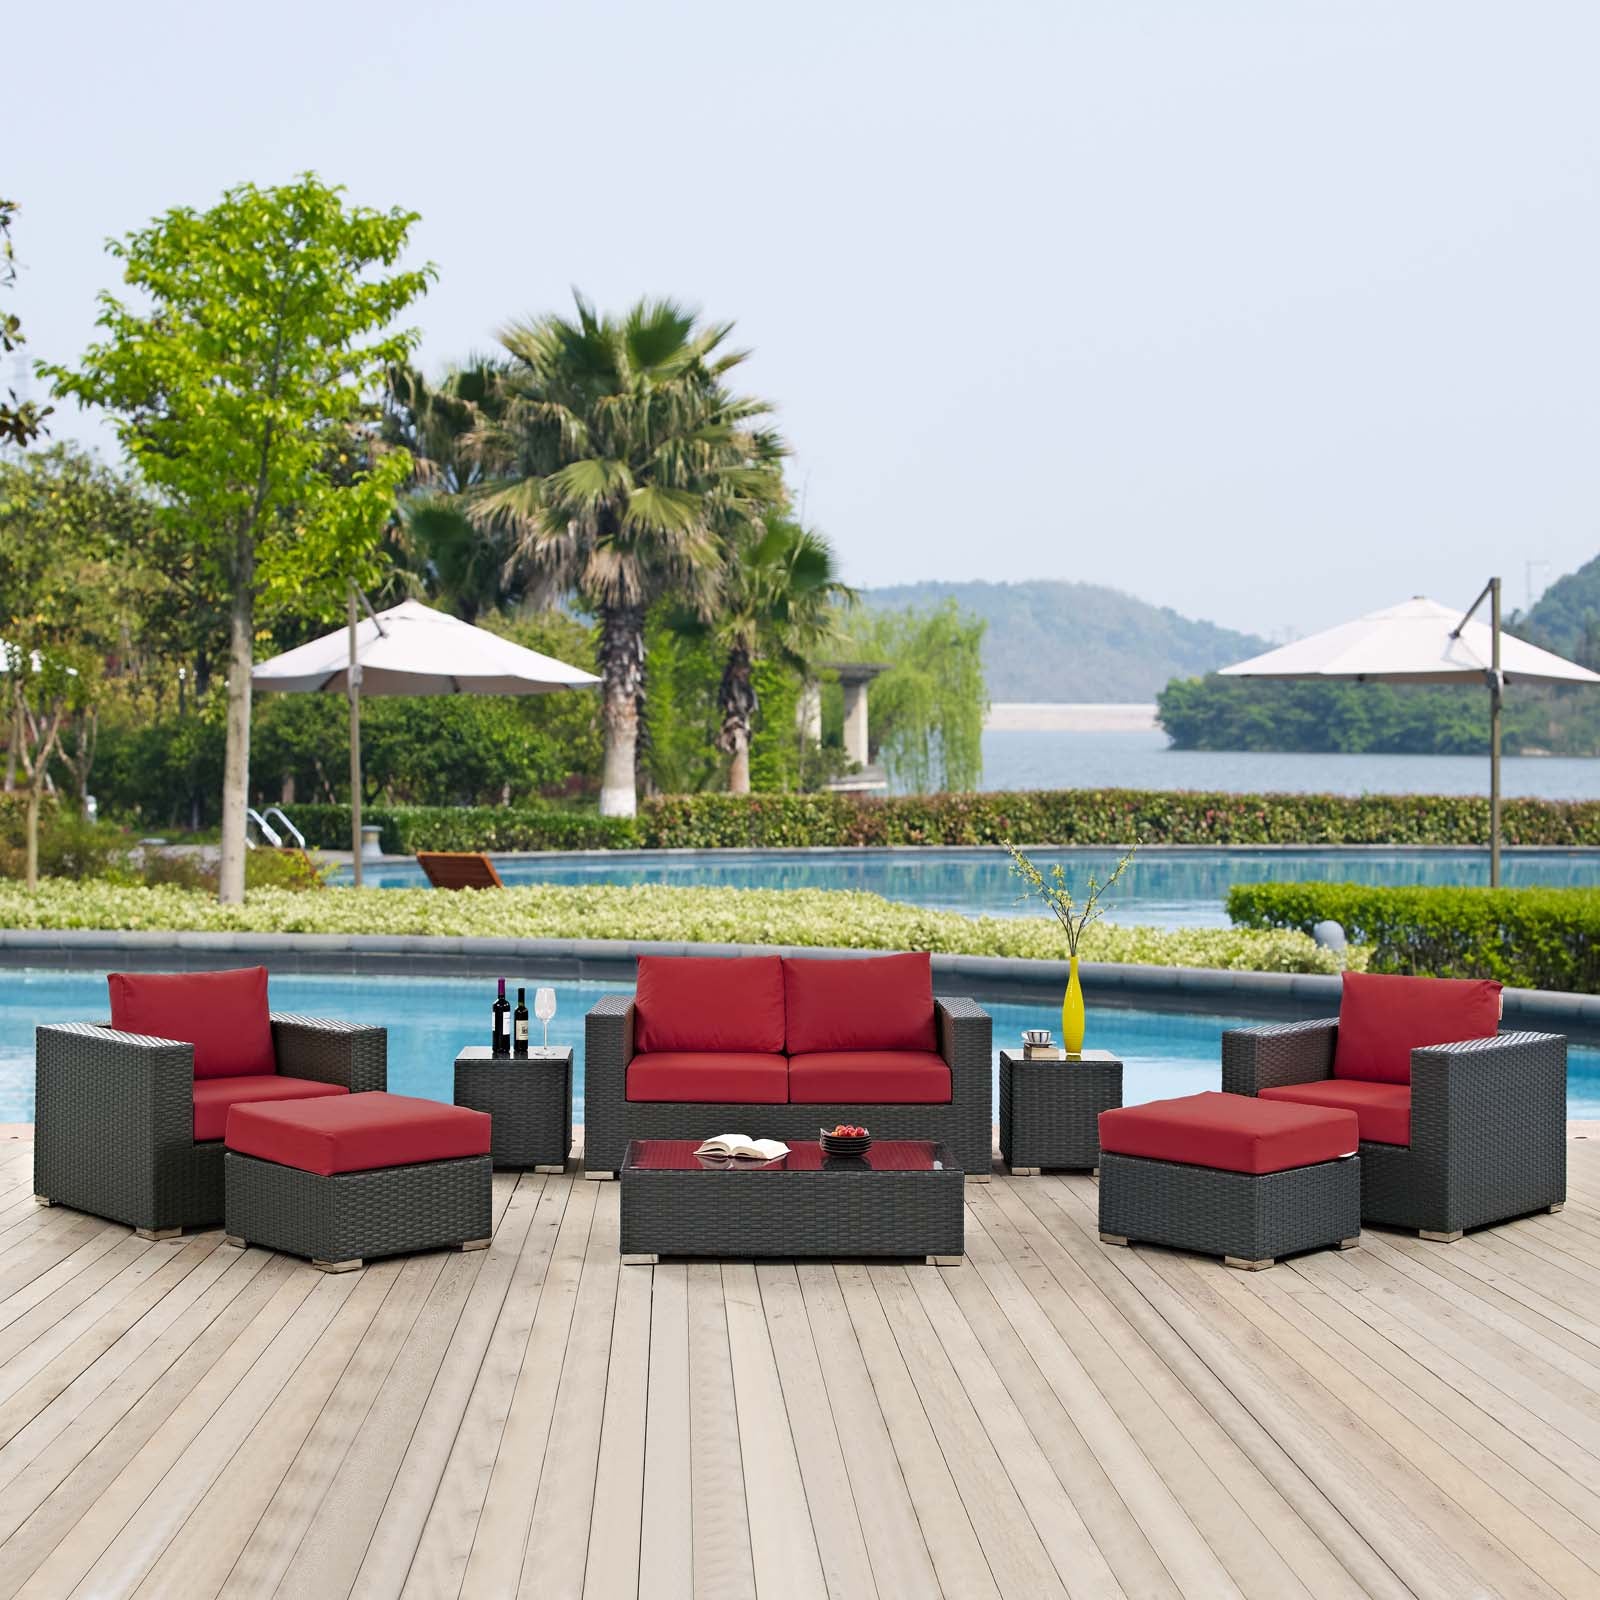 Modway Outdoor Conversation Sets - Sojourn 8 Piece Outdoor Patio Sunbrella Sectional Set Canvas Red